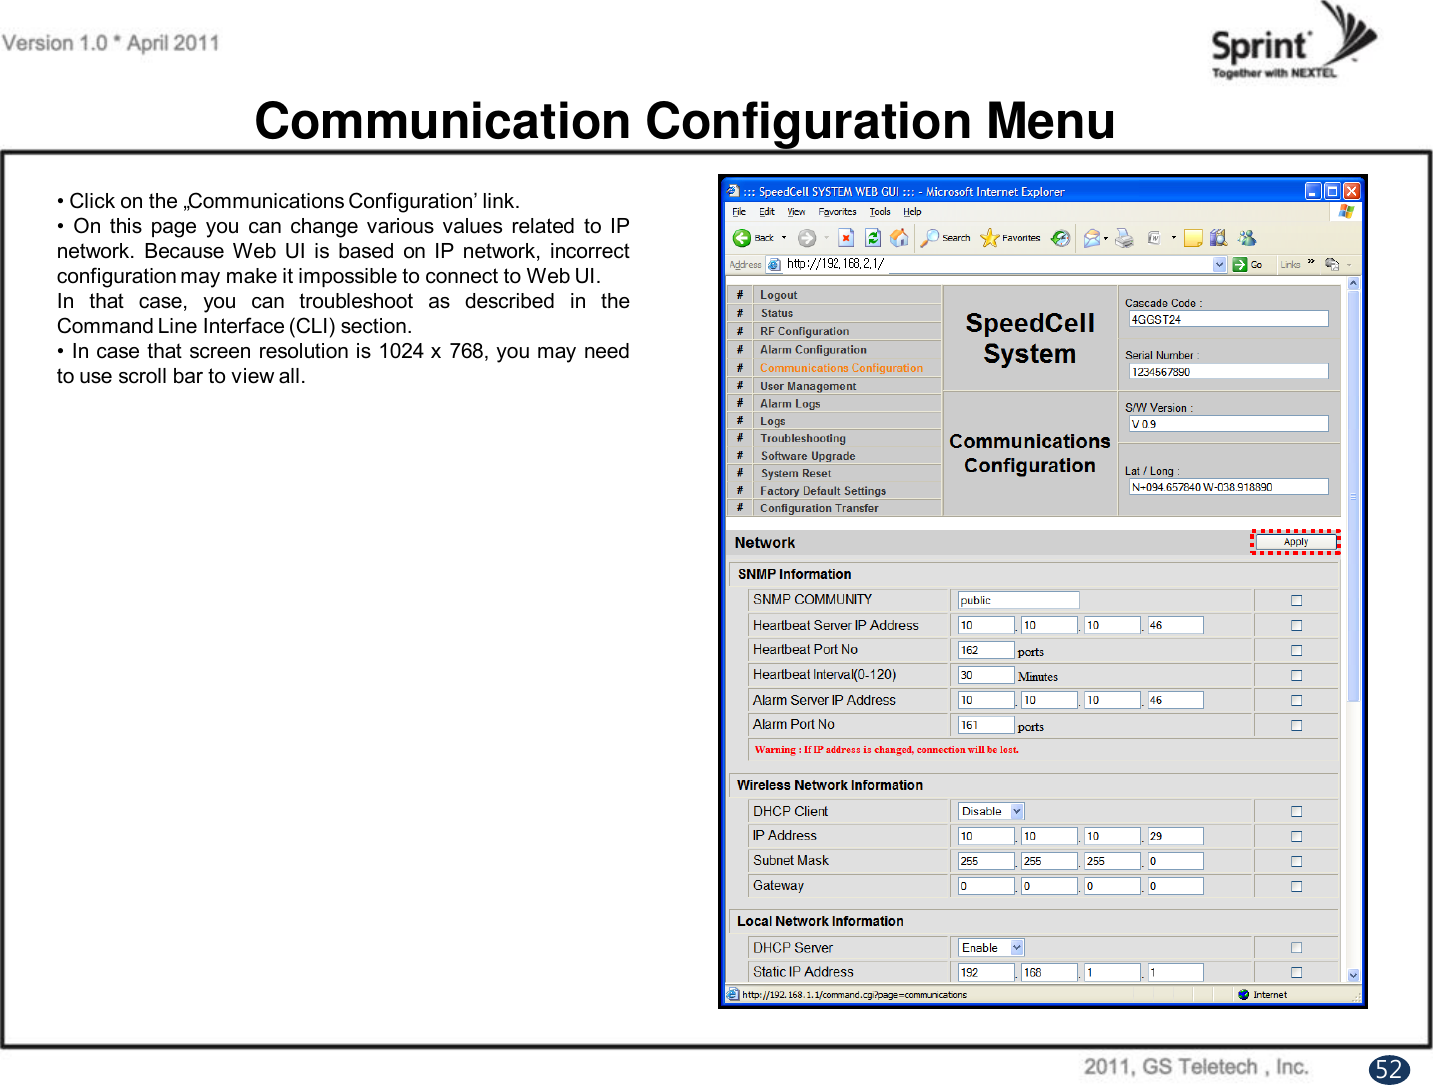 Communication Configuration Menu• Click on the „Communications Configuration‟link.•On this page you can change various values related to IPnetwork. Because Web UI is based on IP network, incorrectconfiguration may make it impossible to connect to Web UI.In that case, you can troubleshoot as described in theCommand Line Interface (CLI) section.•In case that screen resolution is 1024 x 768, you may needto use scroll bar to view all.52